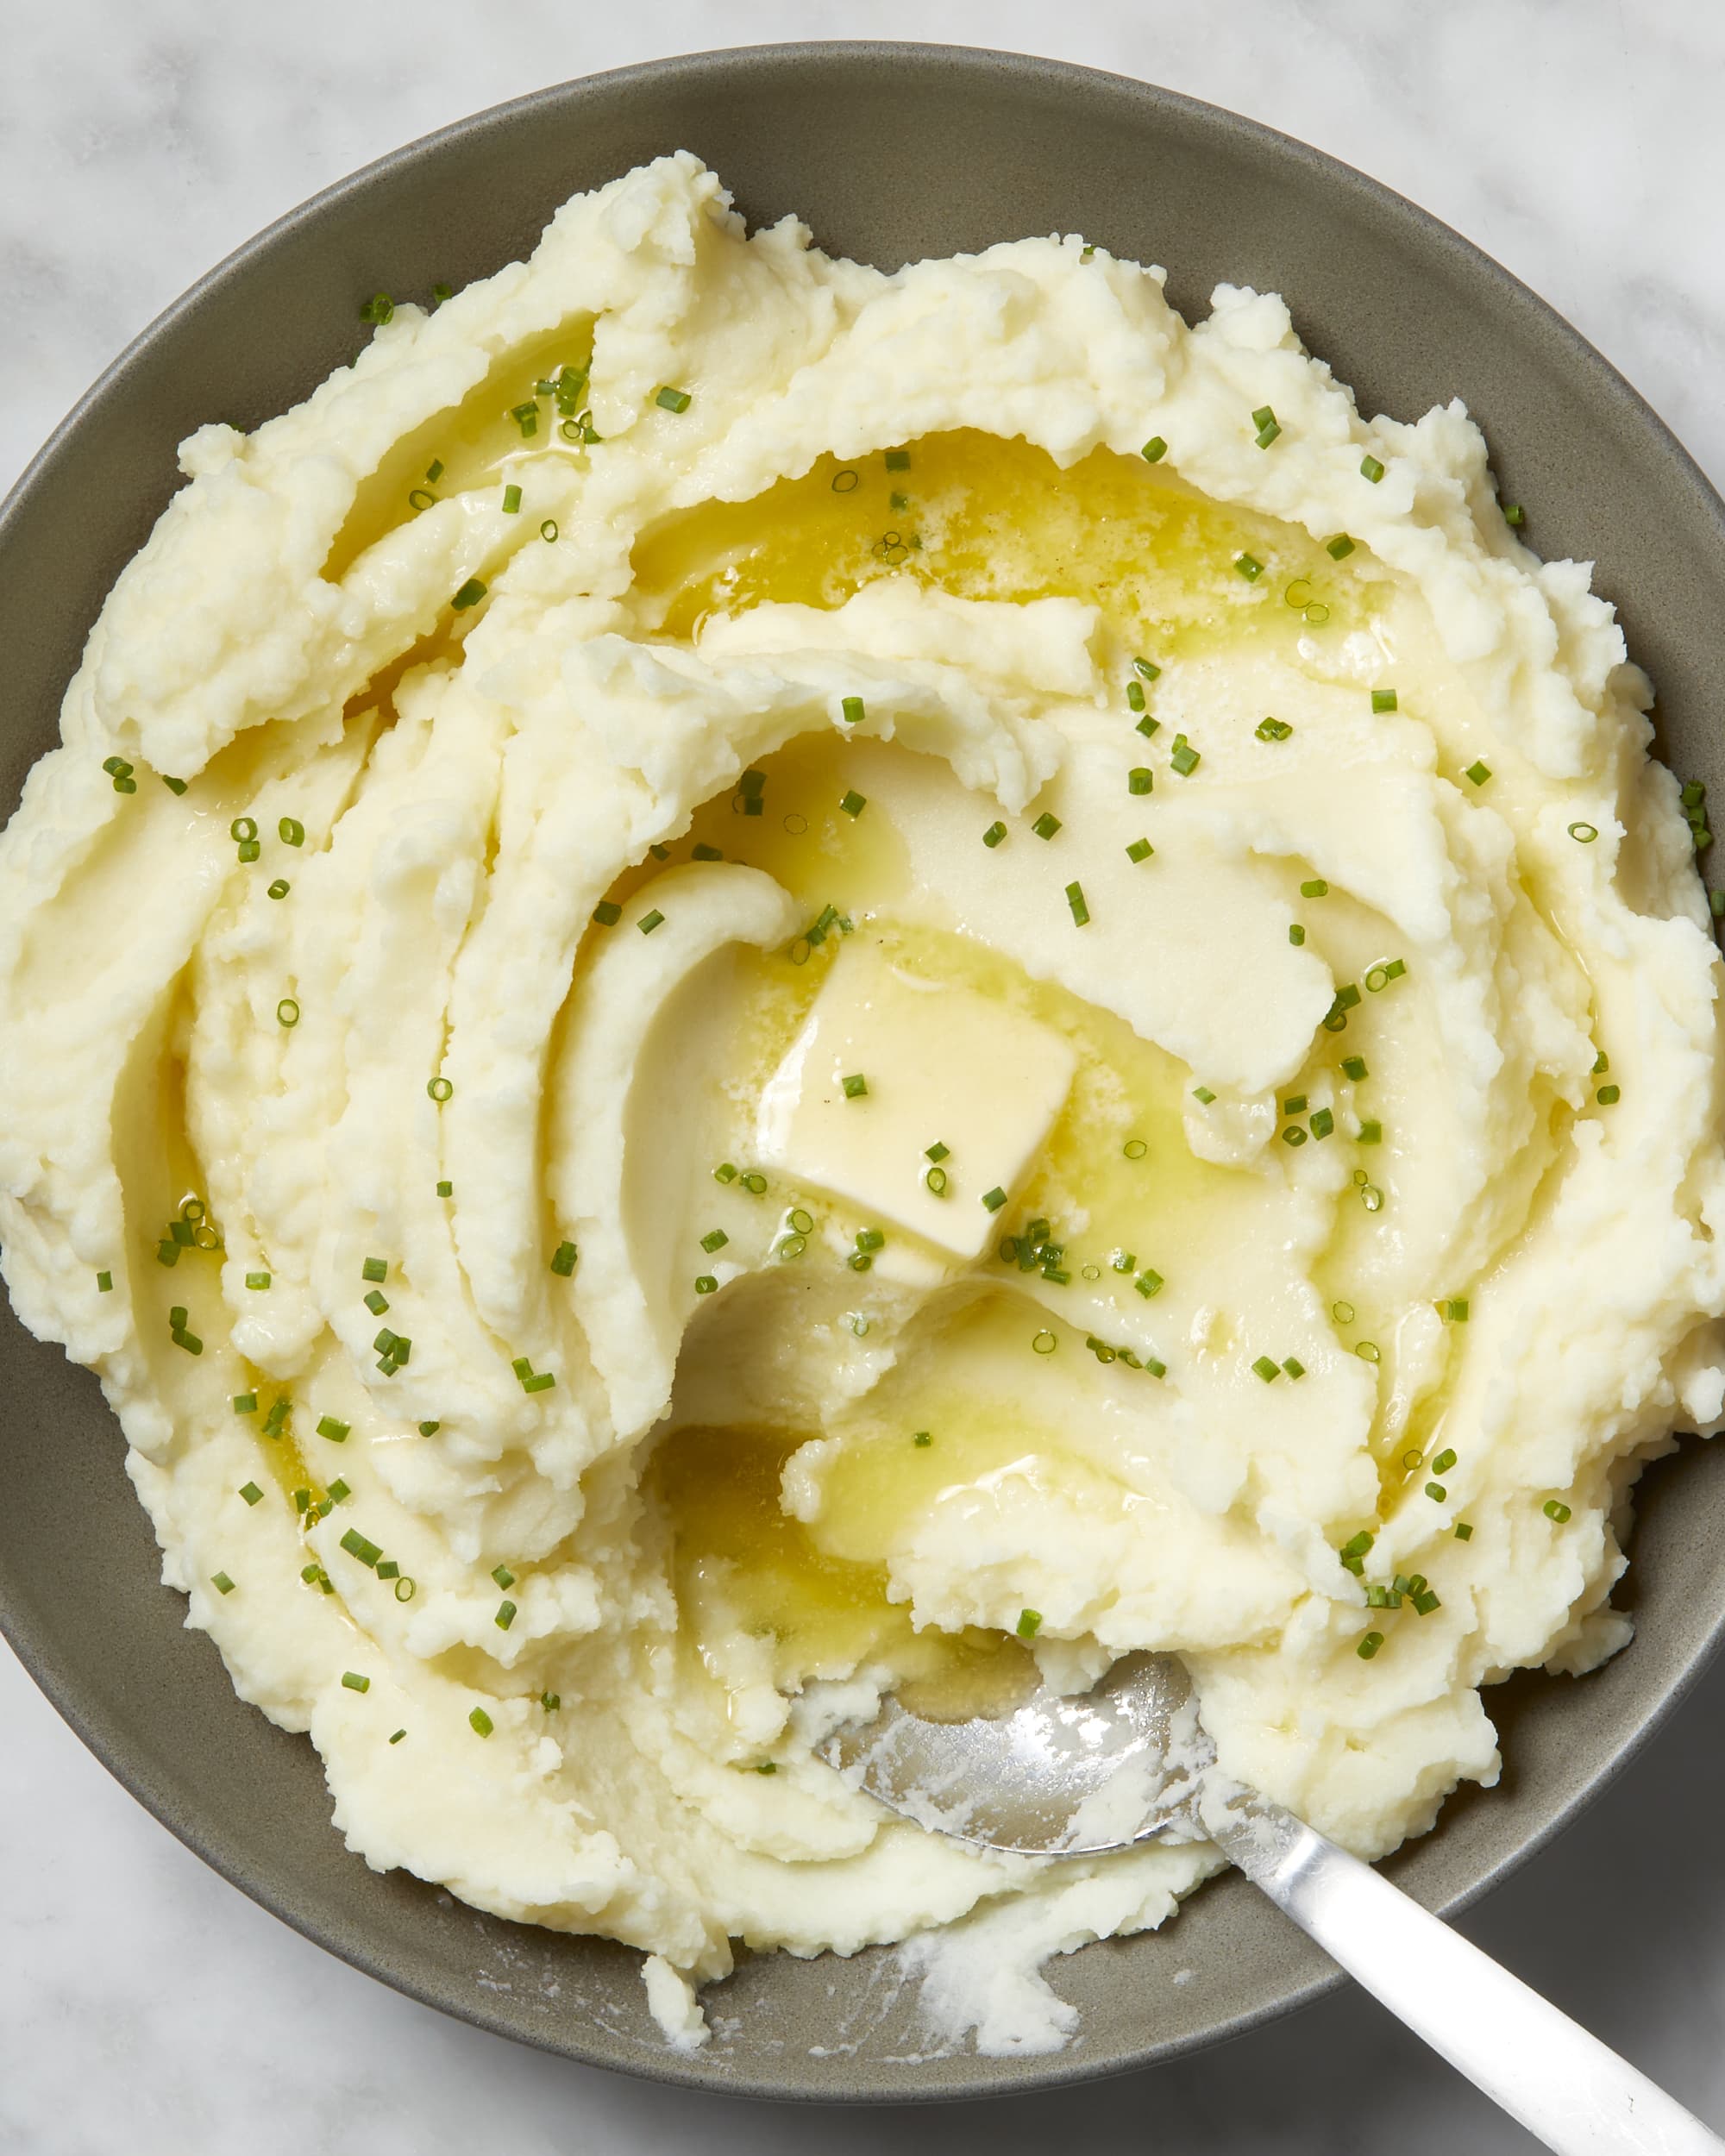 OXO - What's your trick for making fluffy mashed potatoes? We use